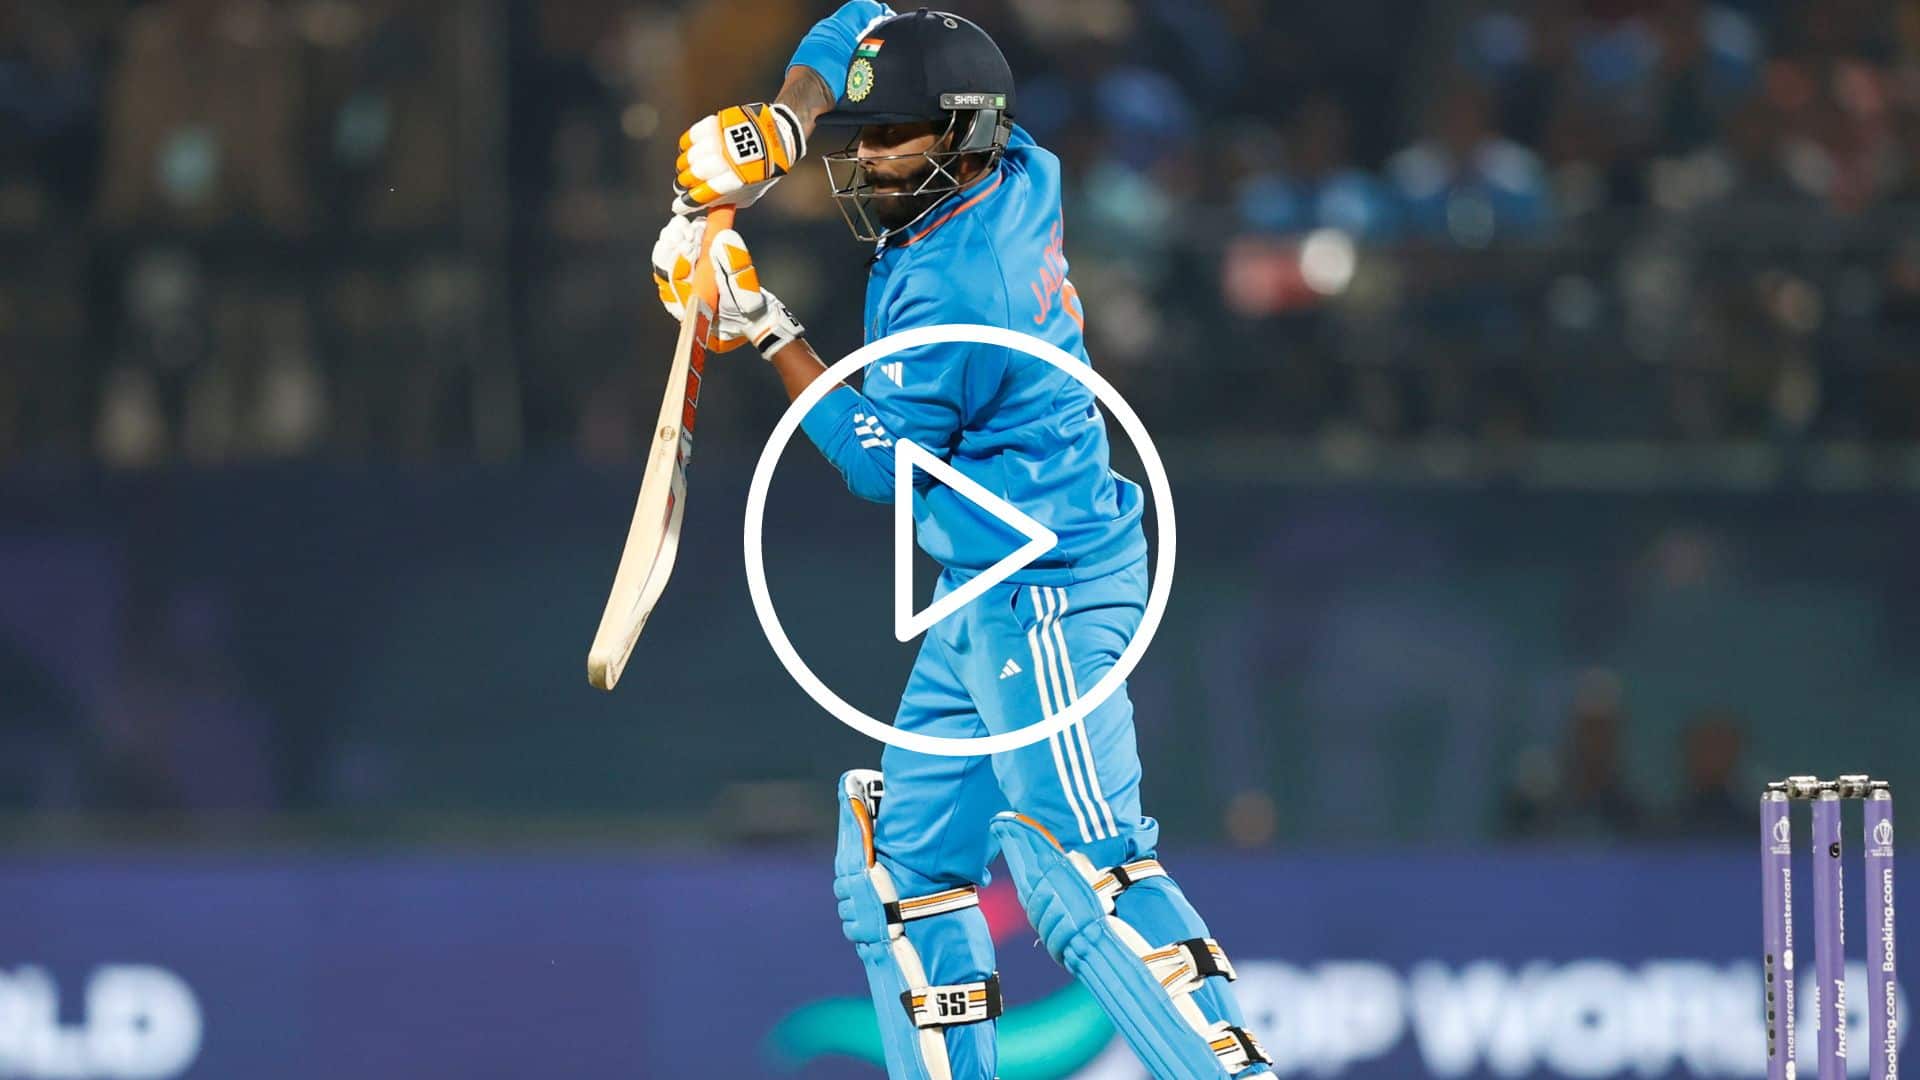 [Watch] Virat Kohli Slams First Fifty Against New Zealand In World Cup